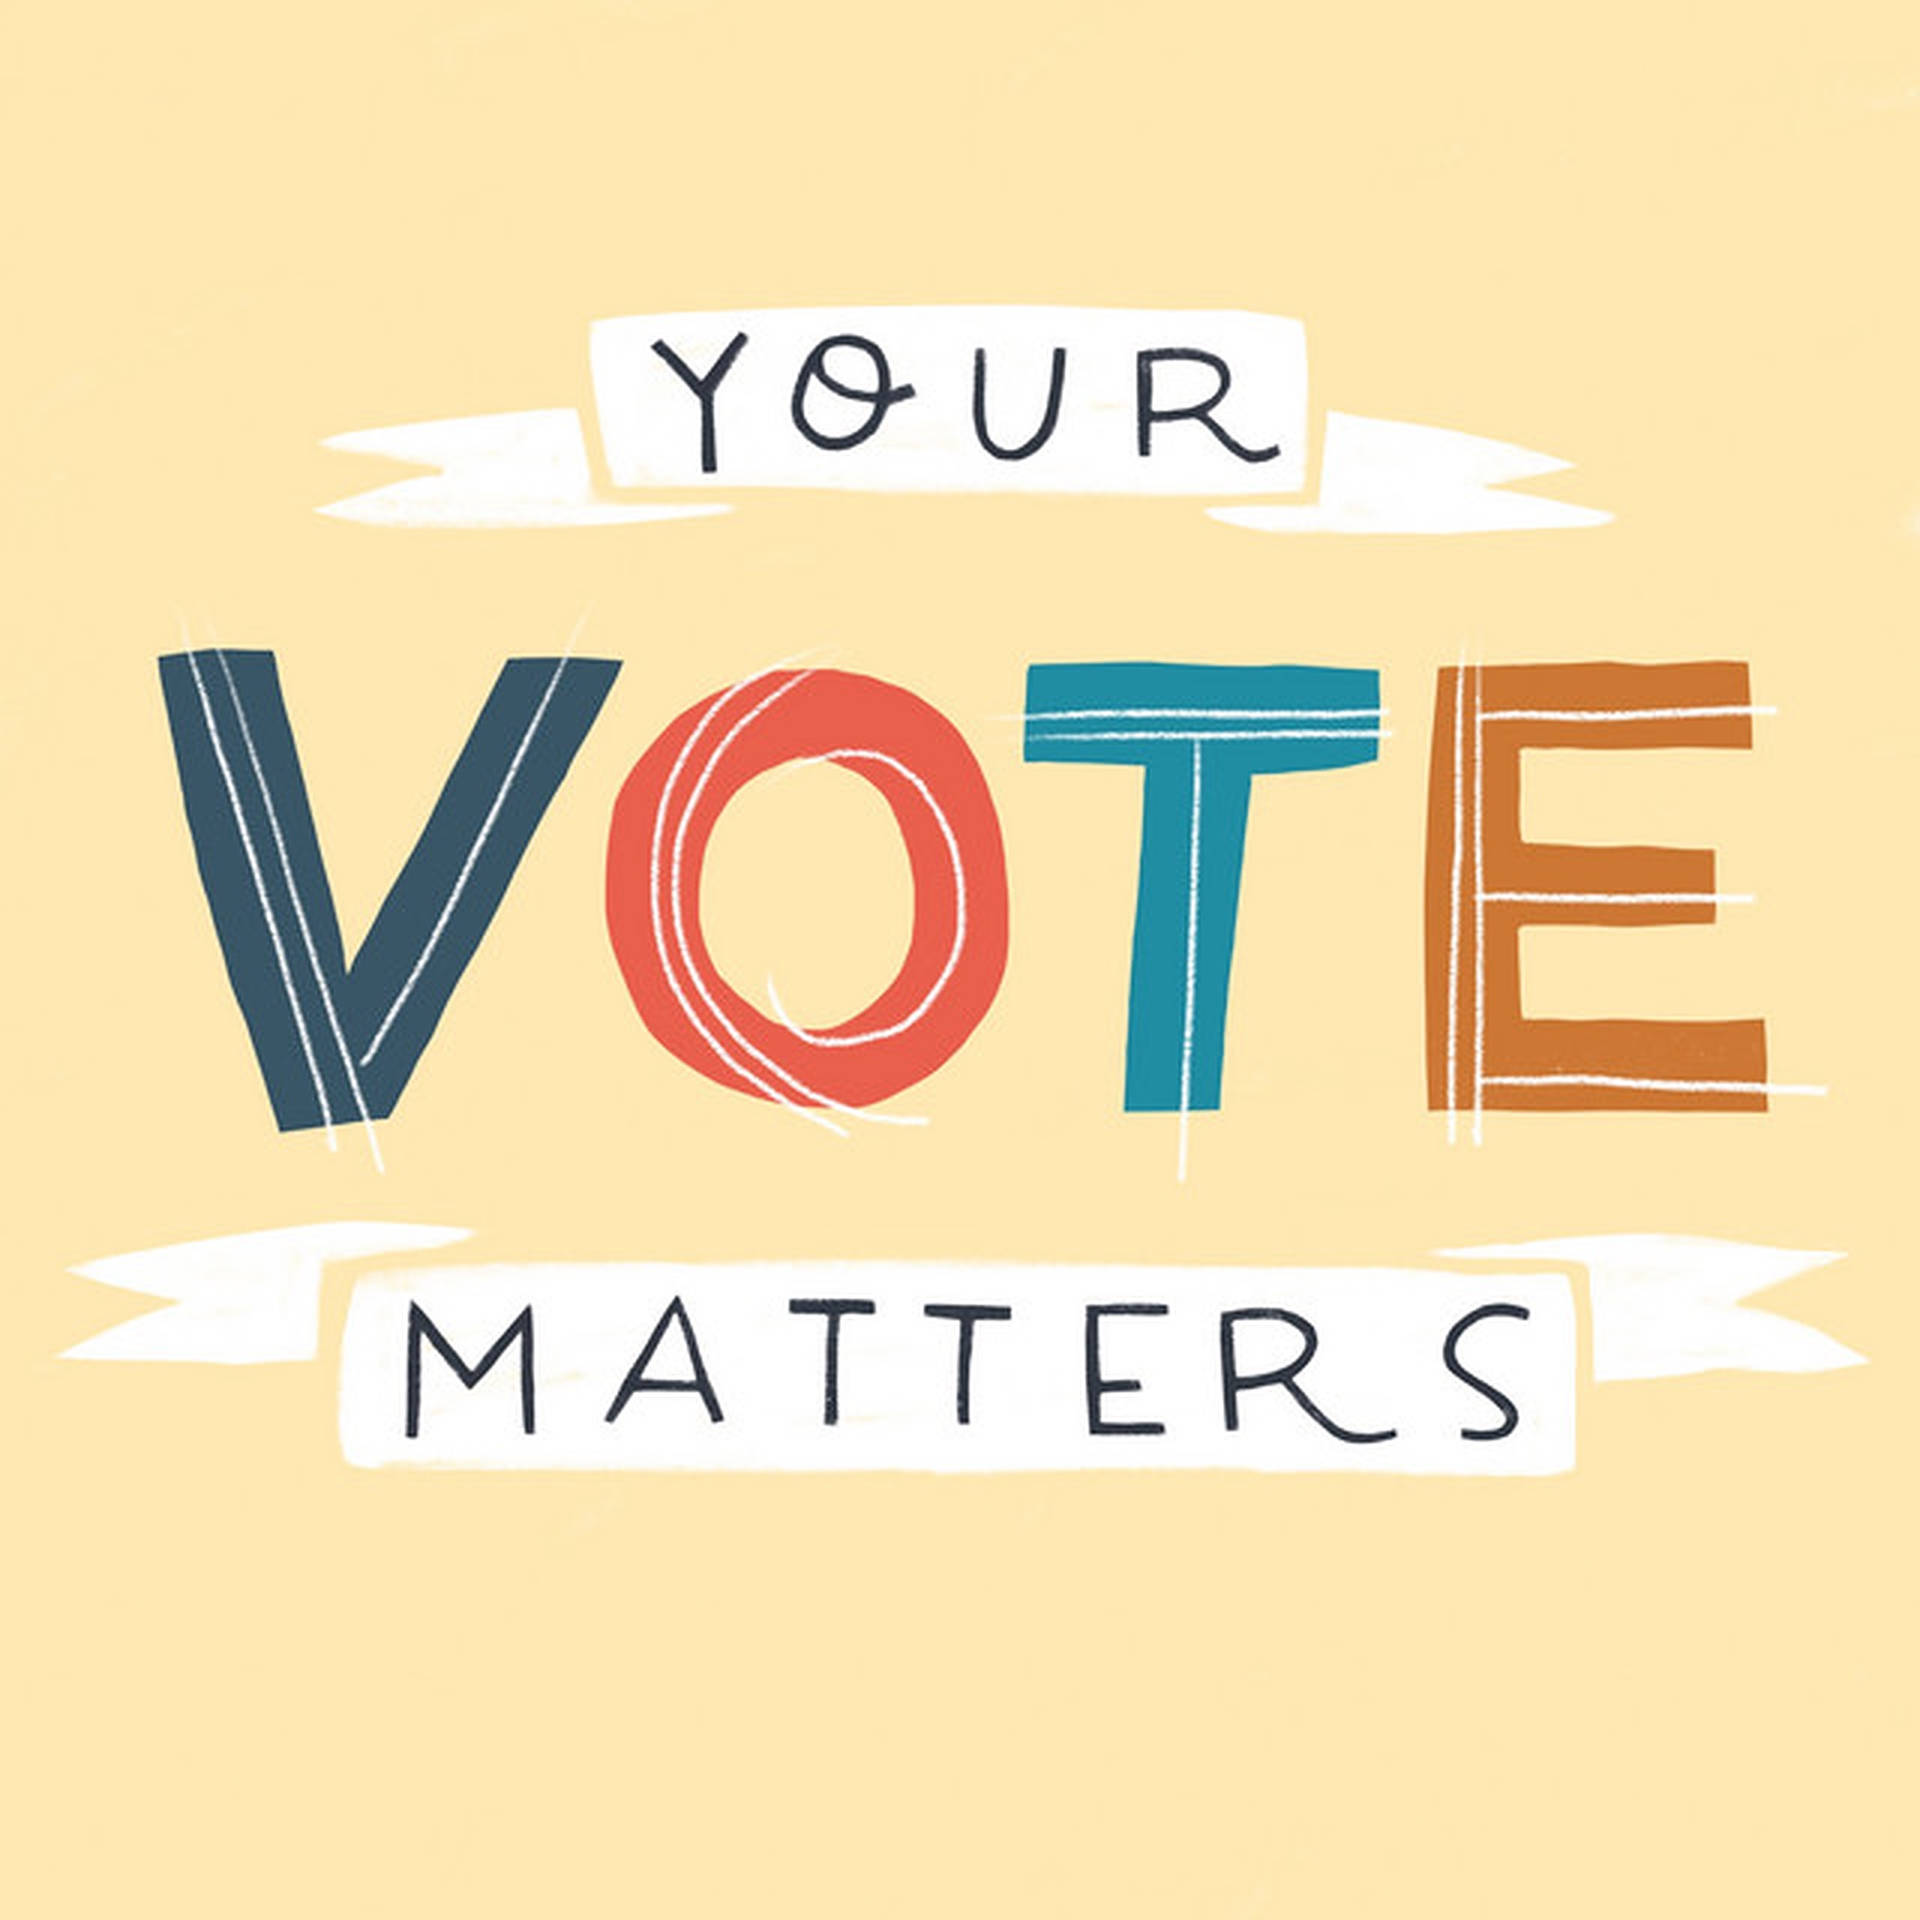 Election Your Vote Matters Wallpaper